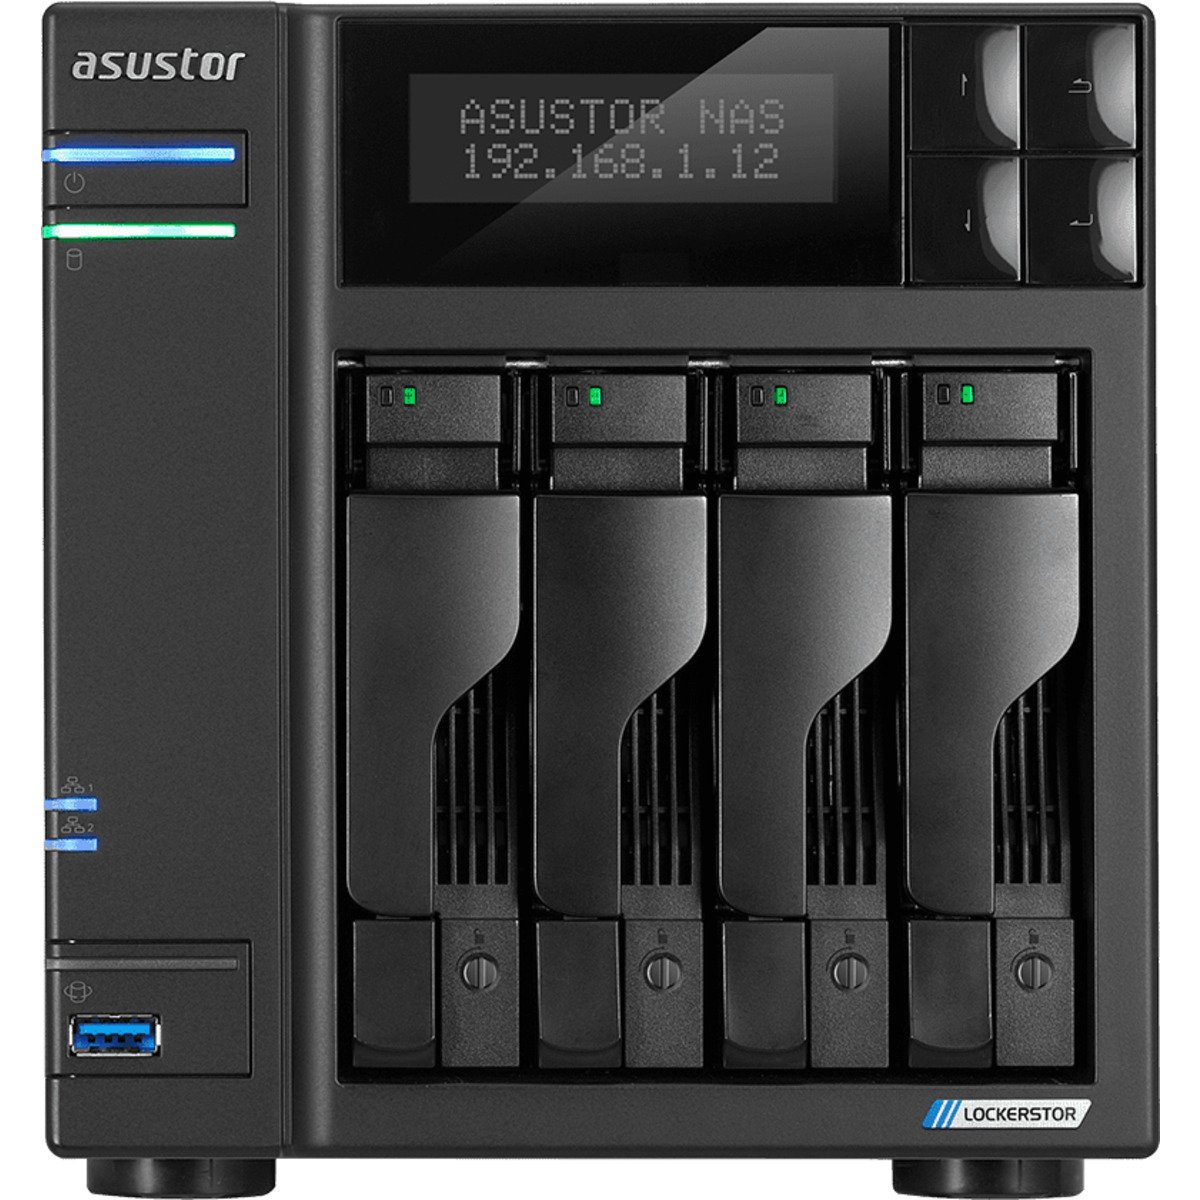 ASUSTOR AS6604T Lockerstor 4 48tb 4-Bay Desktop Multimedia / Power User / Business NAS - Network Attached Storage Device 3x16tb Seagate IronWolf Pro ST16000NT001 3.5 7200rpm SATA 6Gb/s HDD NAS Class Drives Installed - Burn-In Tested - ON SALE - FREE RAM UPGRADE AS6604T Lockerstor 4